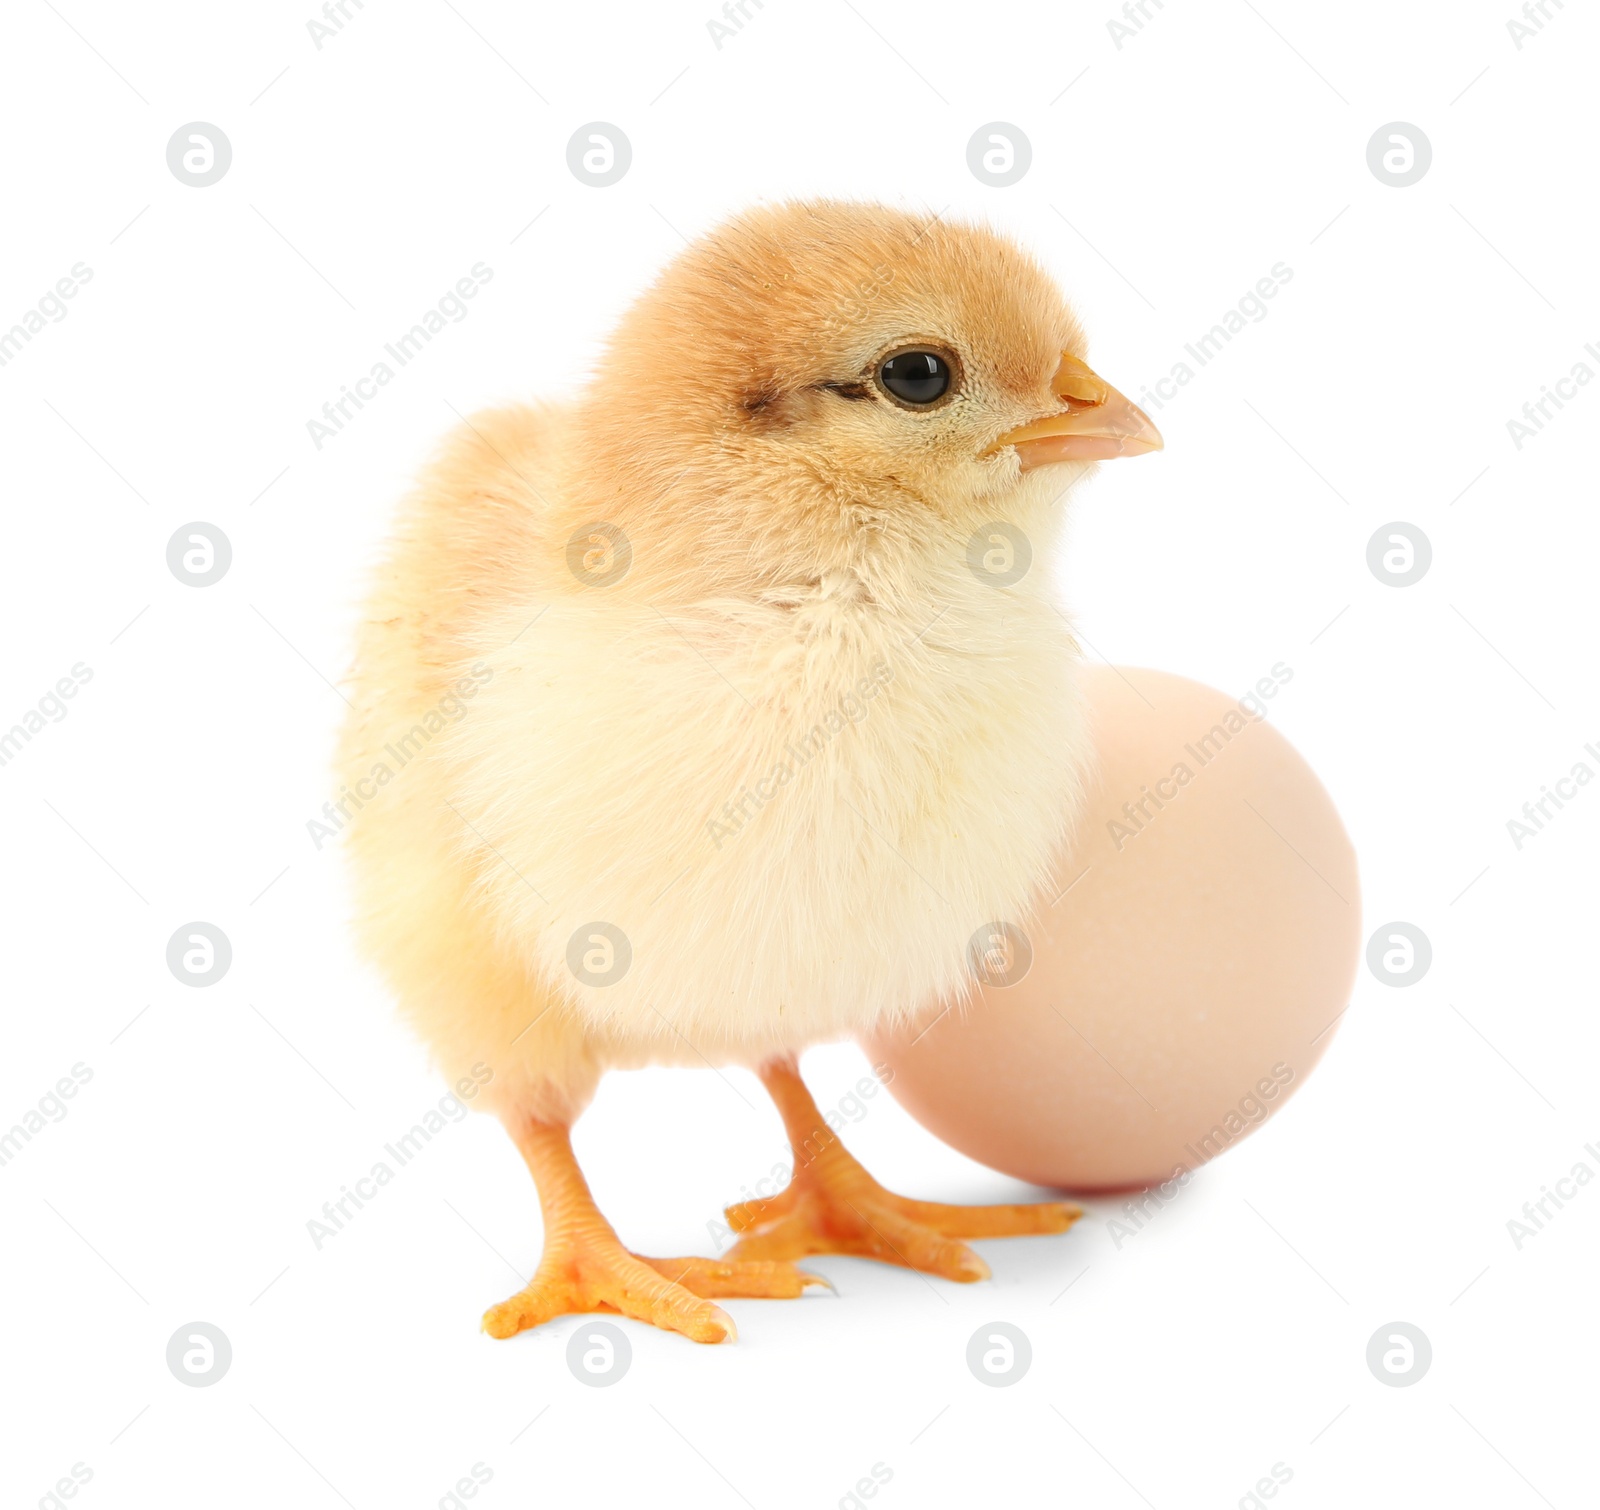 Photo of Cute chick and egg isolated on white. Baby animal